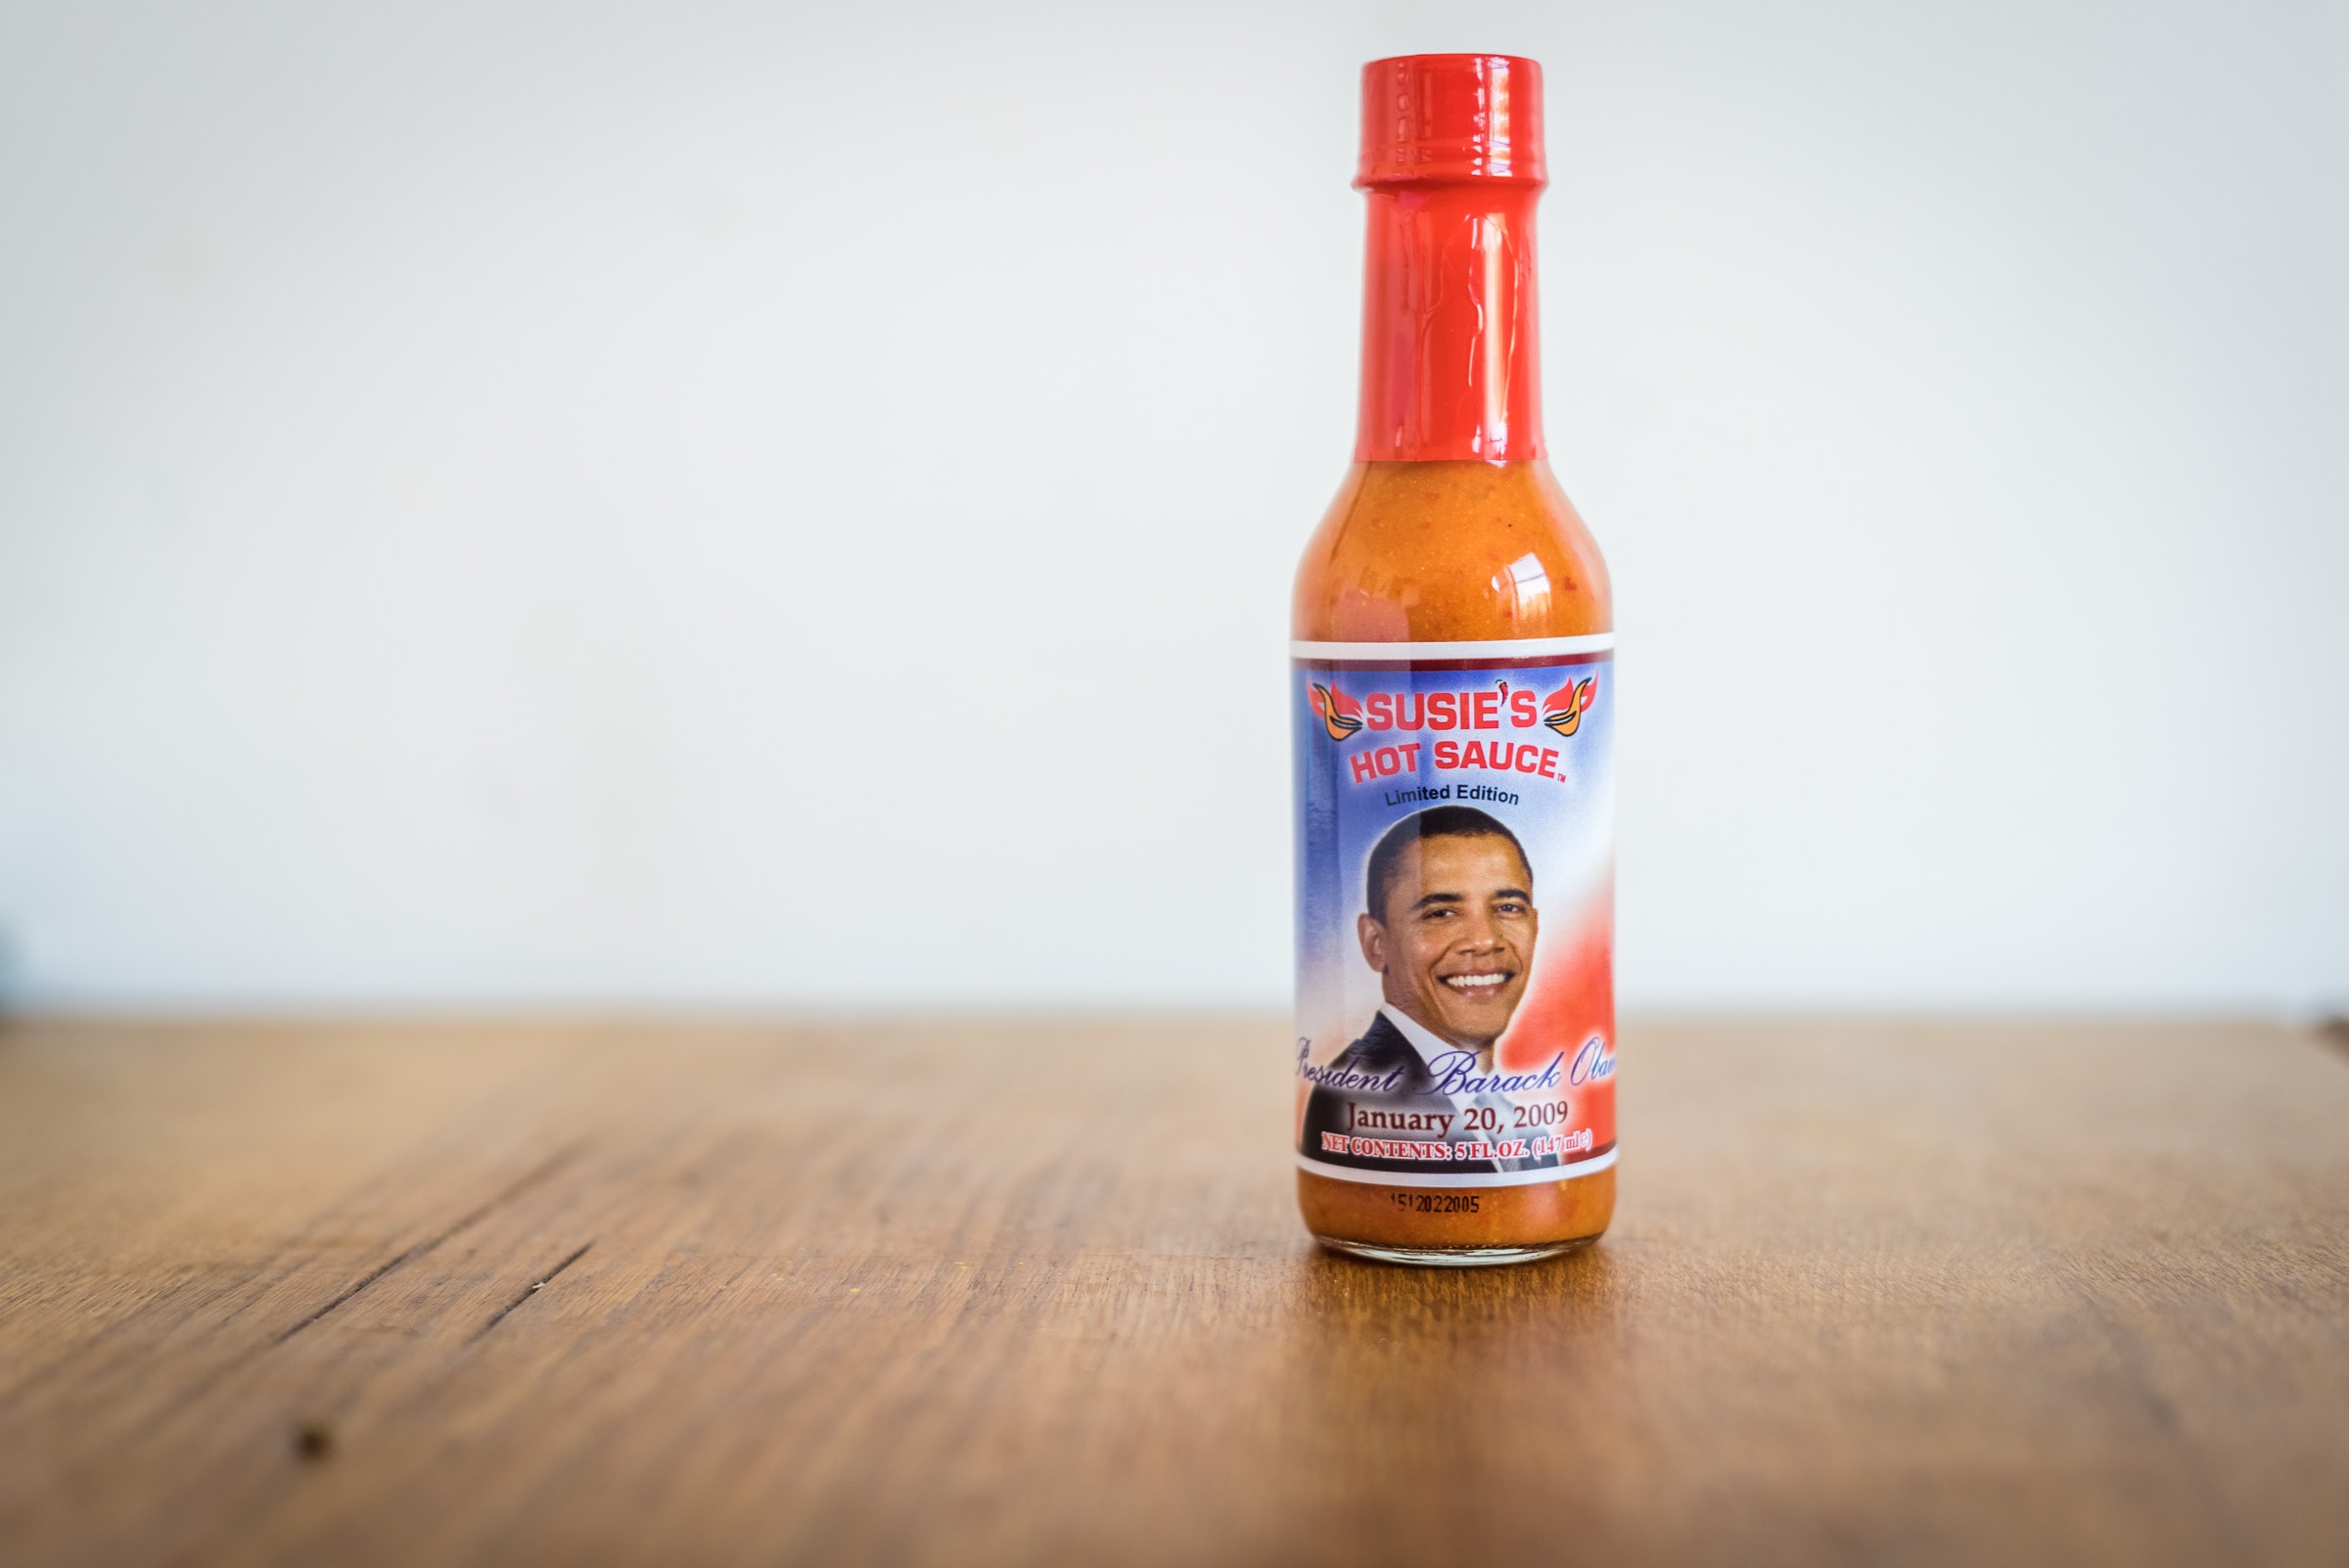 Susie's Hot Sauce Limited President Obama Edition